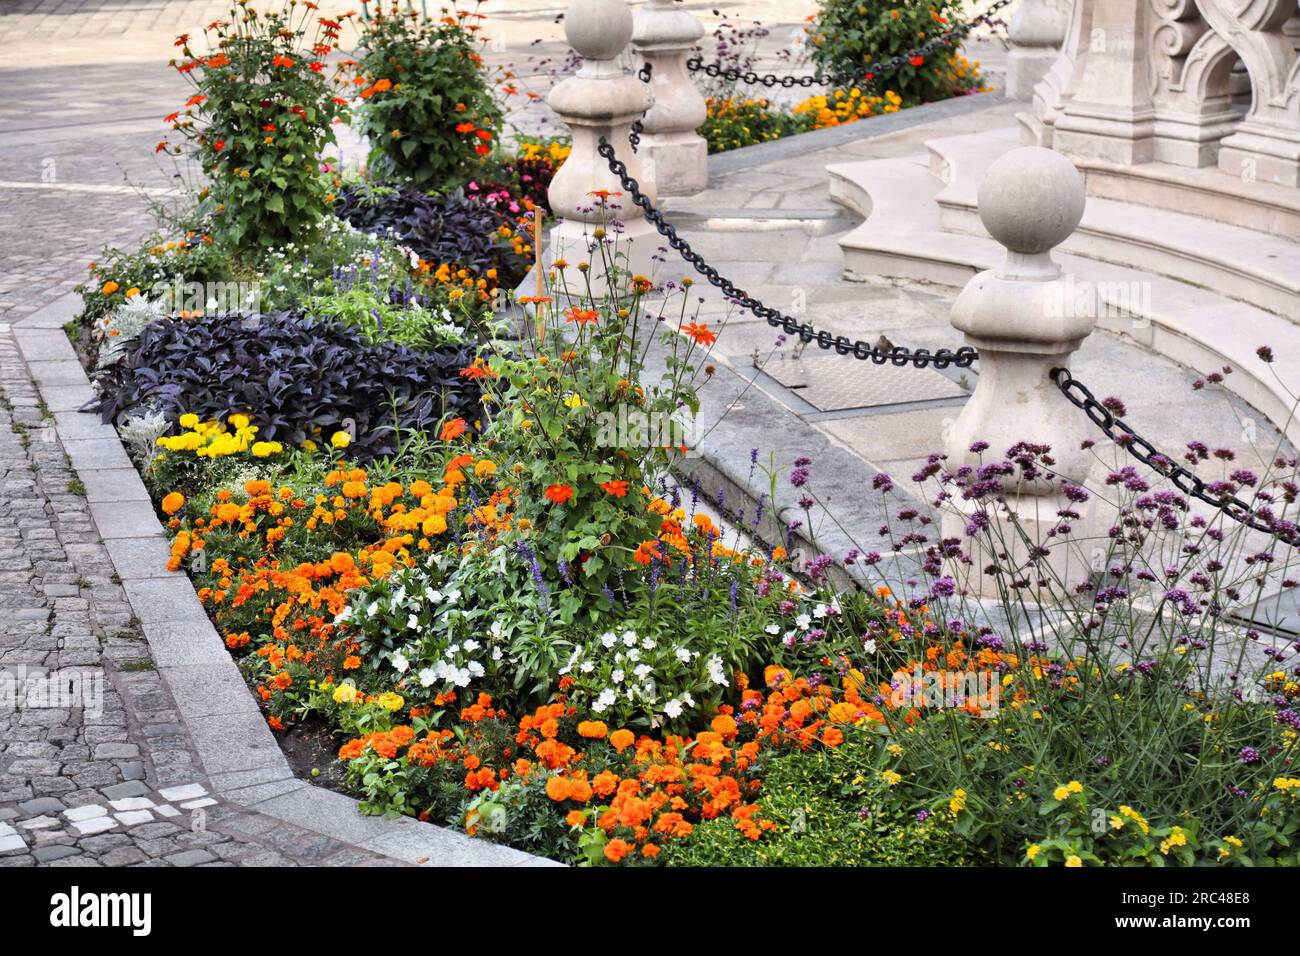 City flowerbed in Linz, Austria. Mixed species flower patch with marigold, purpletop vervain (Verbena bonariensis), Impatiens walleriana and Mexican s Stock Photo